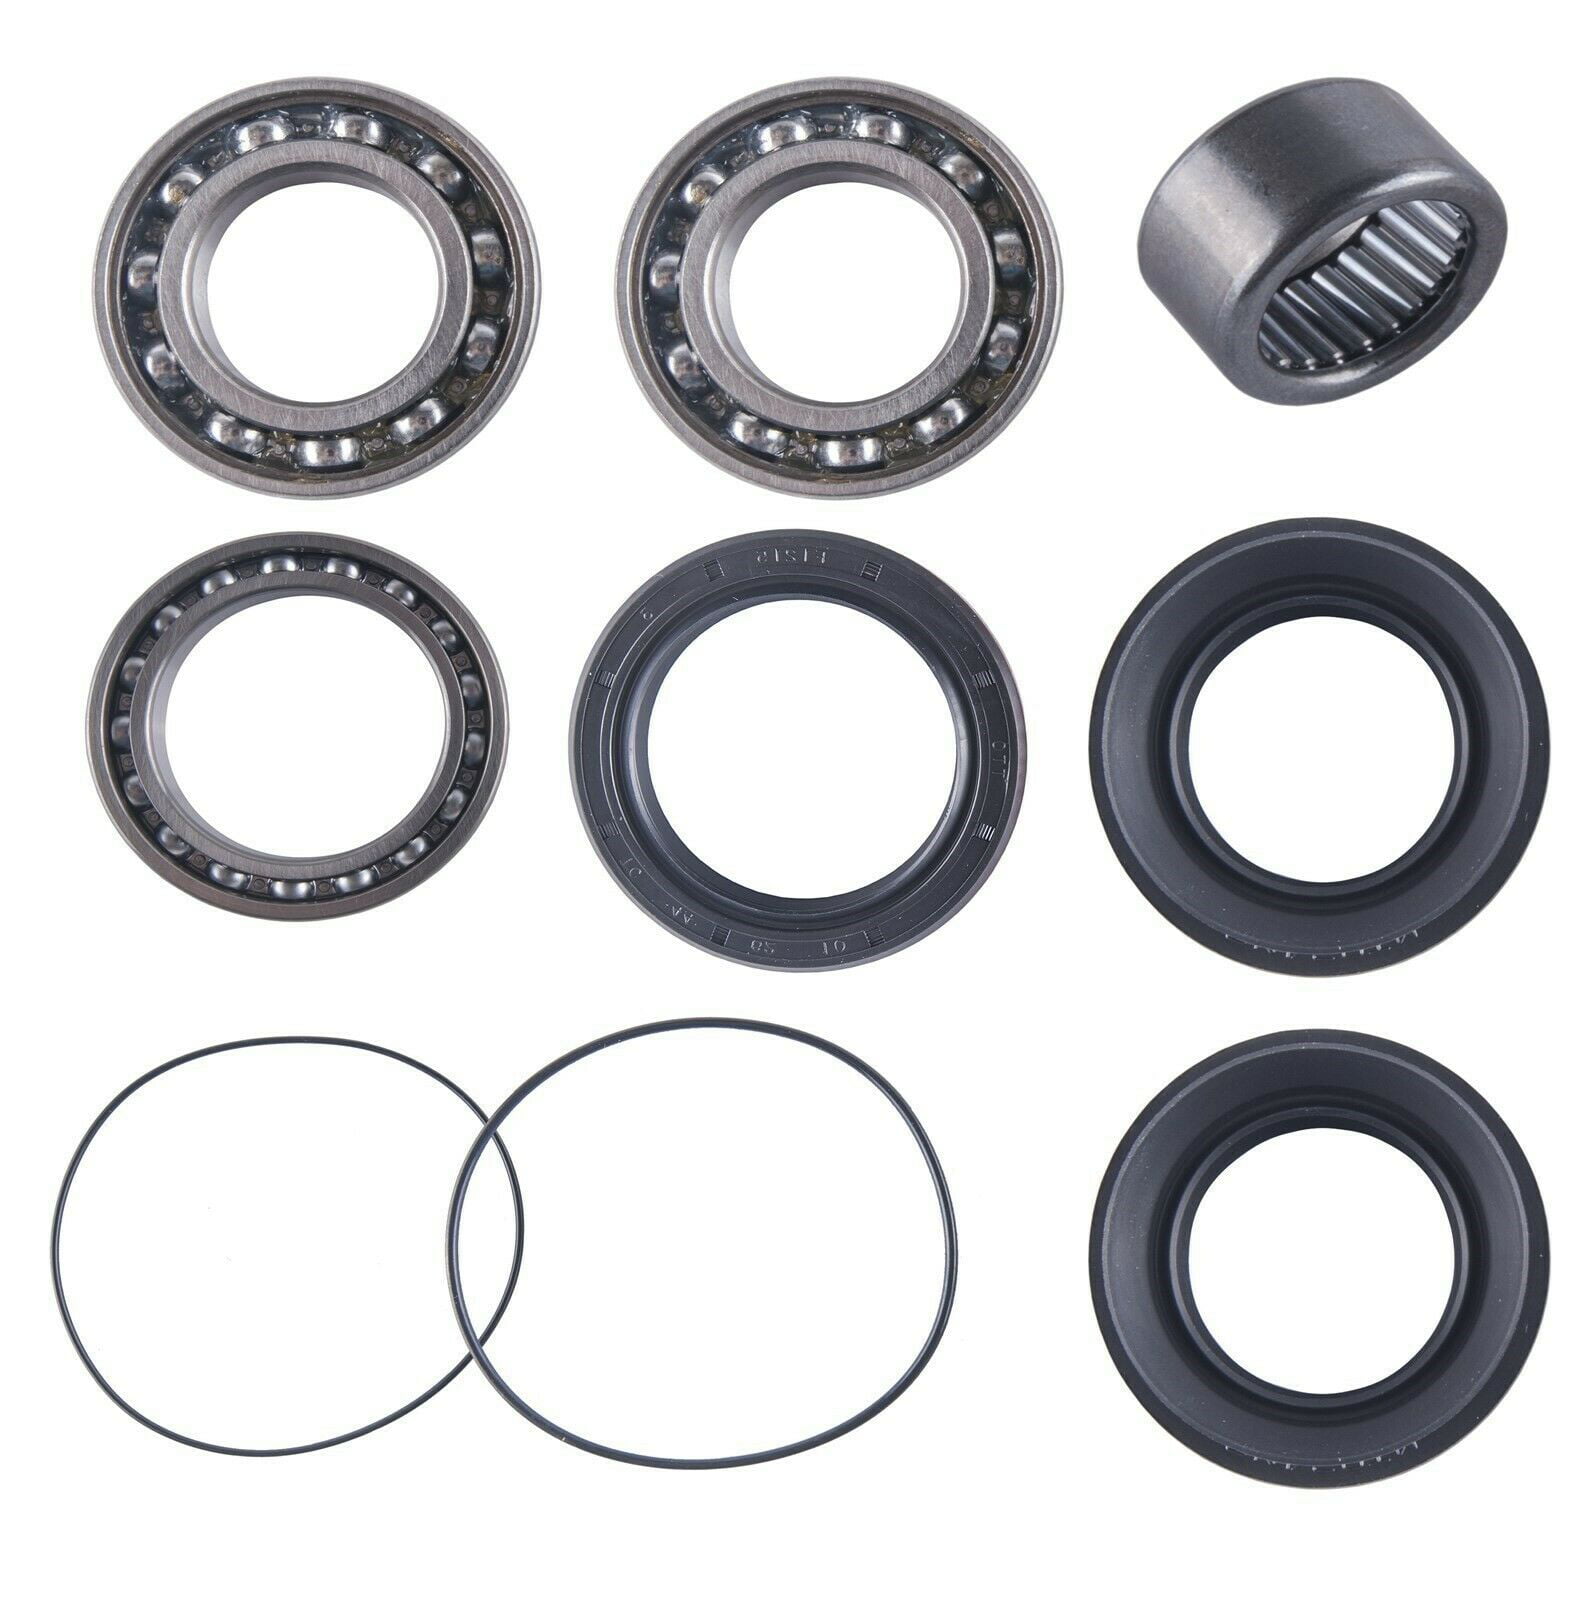 East Lake Axle front differential bearing & seal kit compatible with Yamaha 350/450 Grizzly 2007 2008-2014 